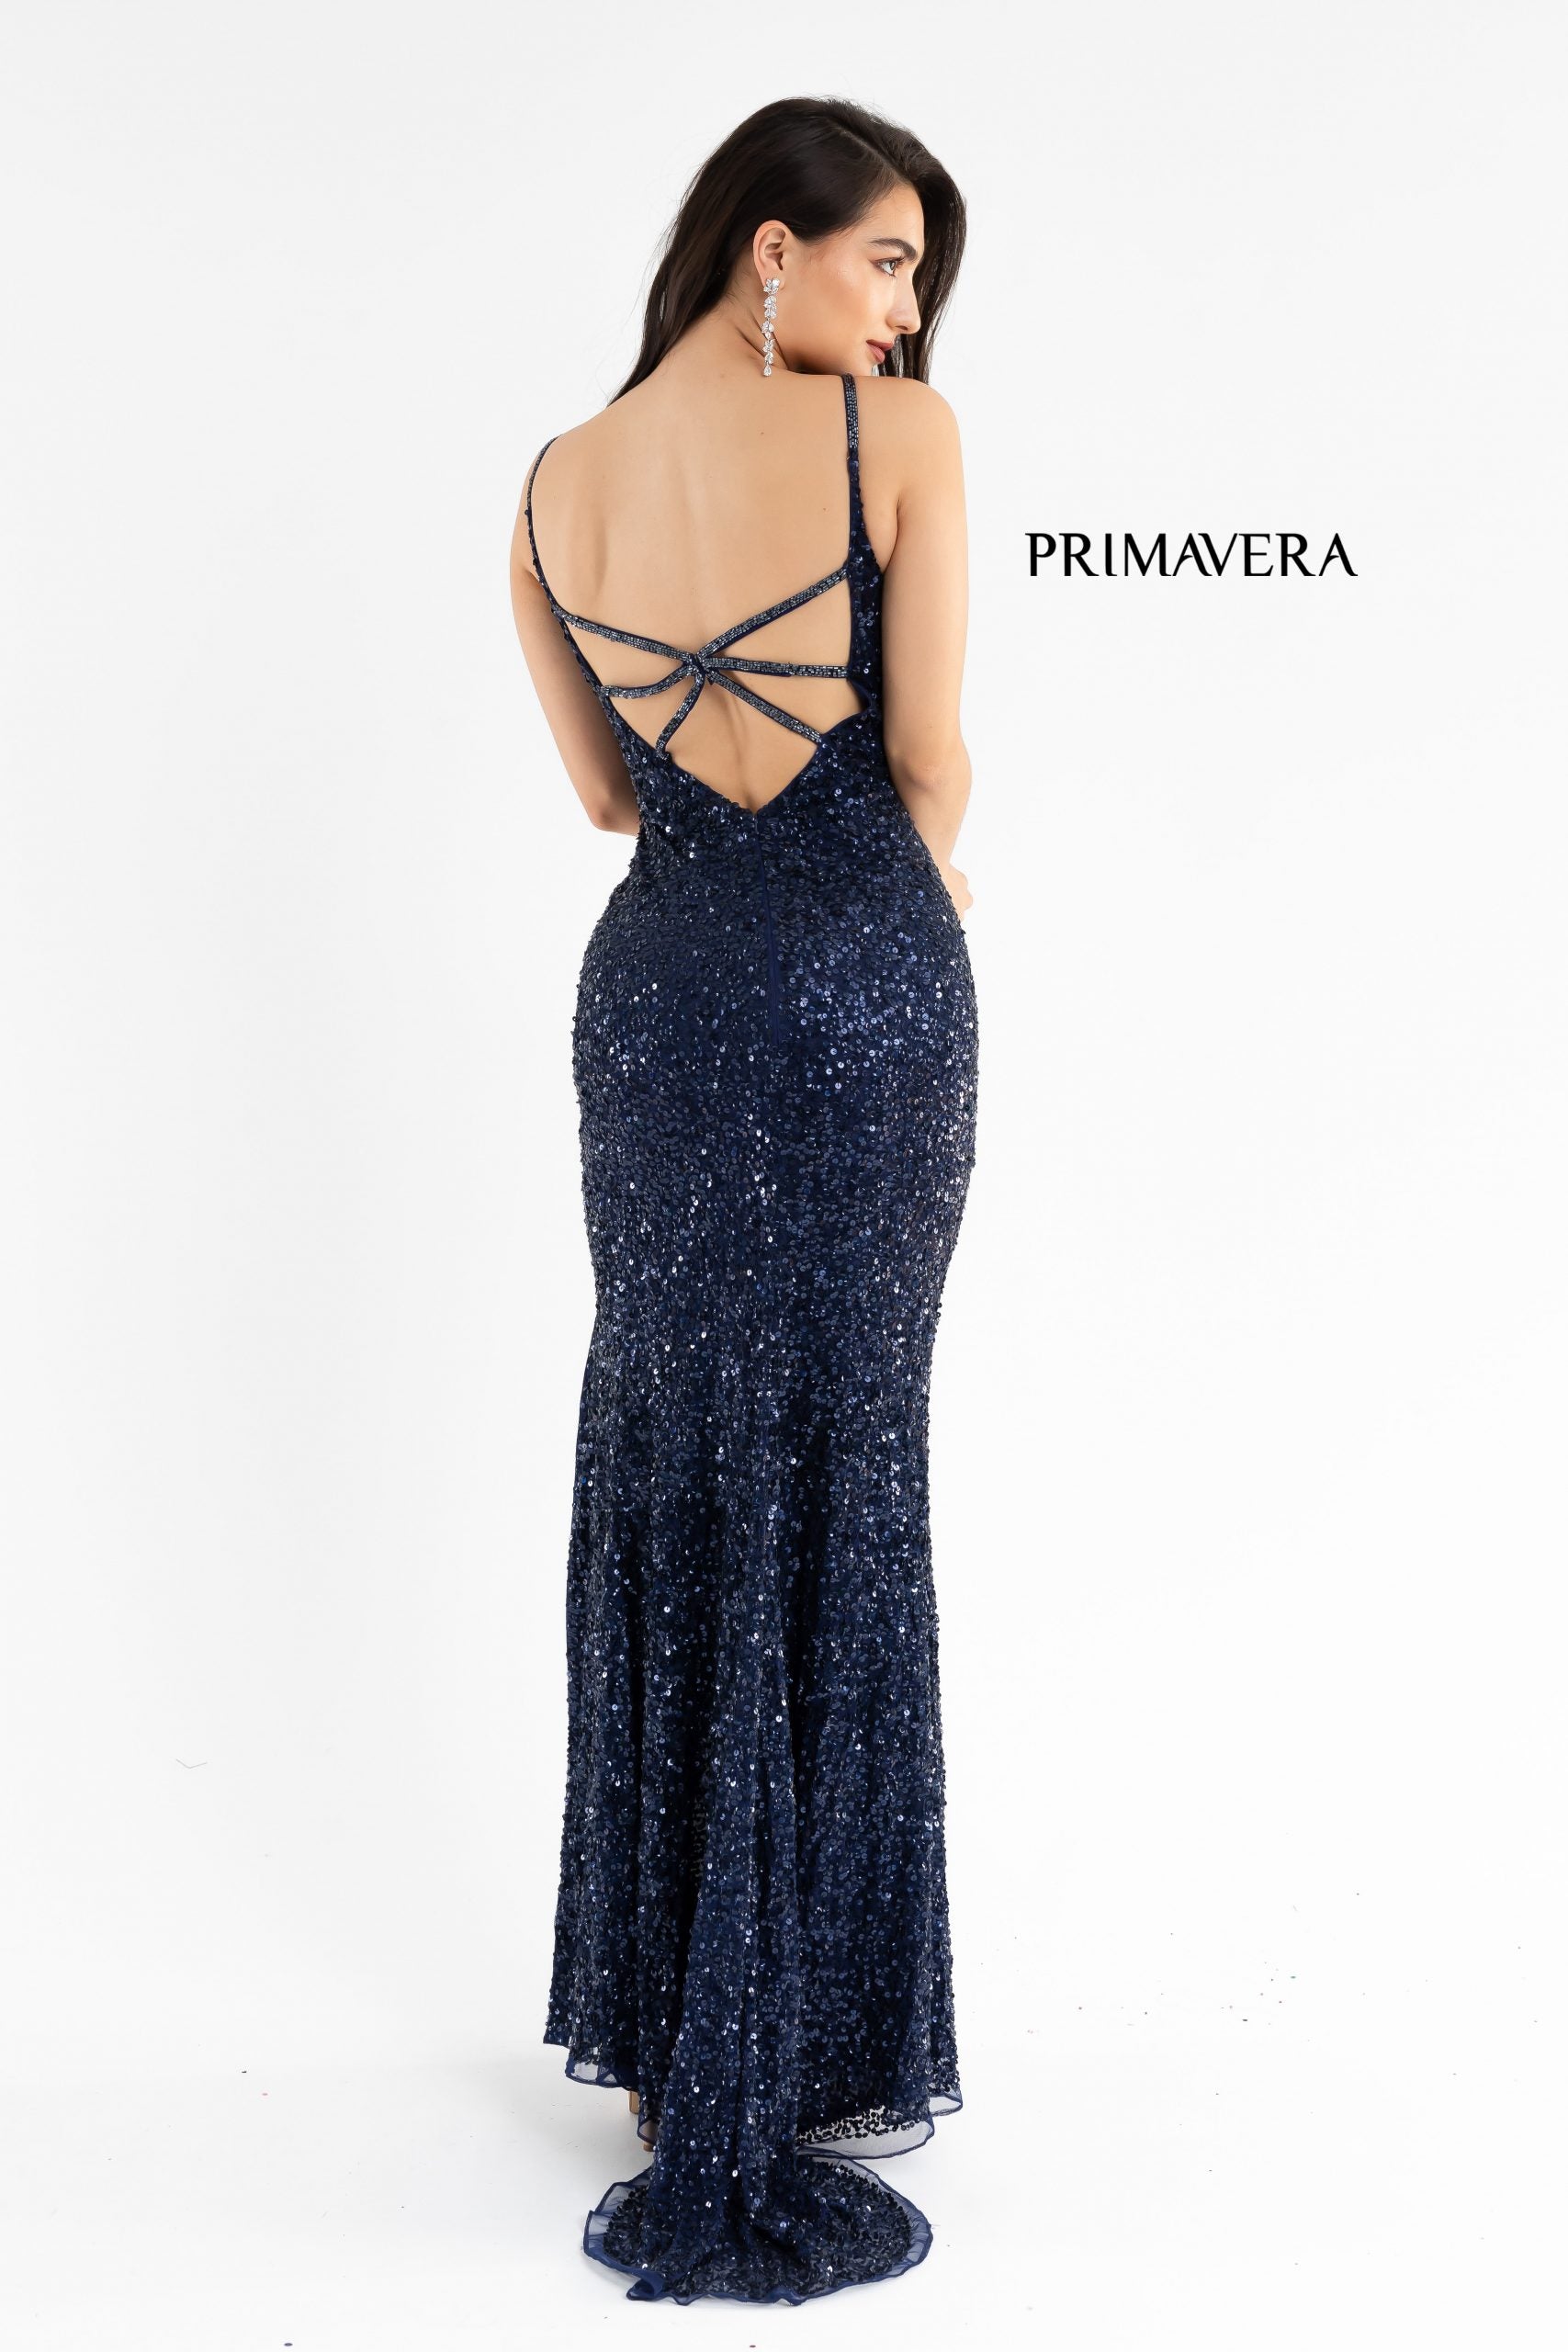 Primavera Couture 3792 Exclusive Prom Dress.  This sequin long prom dress with a v neckline and a side slit.  This dress features an open back with three straps on each side that meet in the middle. The prom dress ends in a sweeping train.  Colors:  Black  Sizes:  00, 6